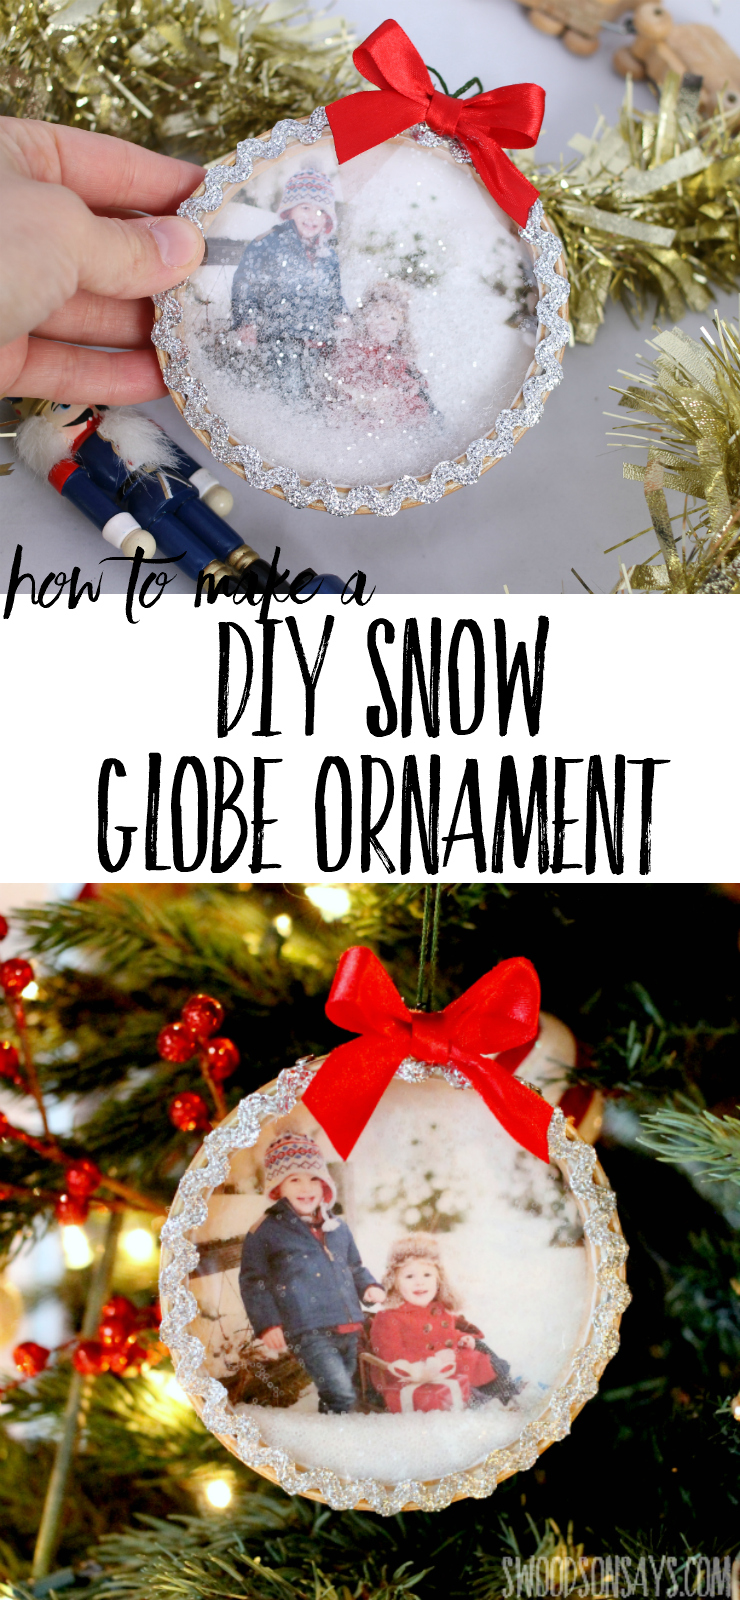 See how easy it is to make this super fun glitter shaker ornament! A DIY snow globe ornament that the kids can play with safely, with a personalized photo. #diysnowglobe #diychristmasornament #christmasornamenttutorial